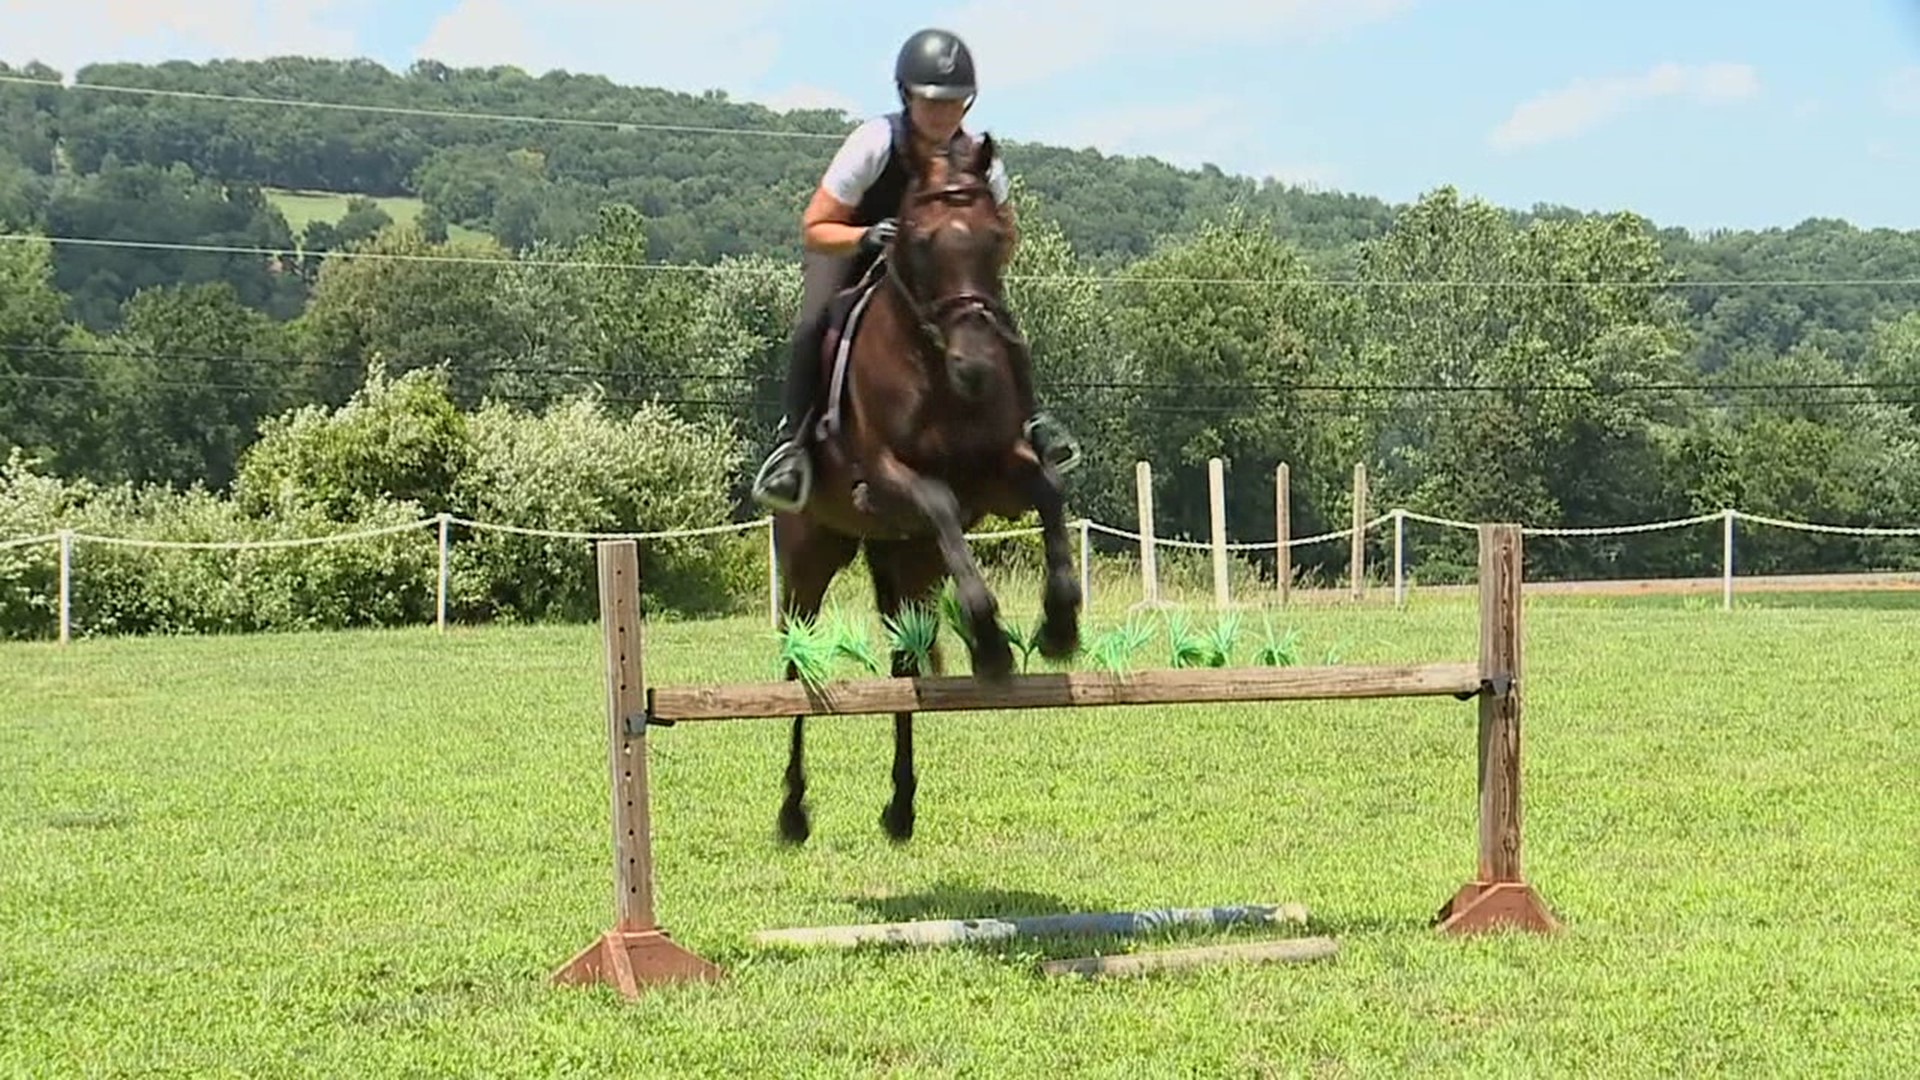 An equestrian who lives and trains near Elysburg has qualified for next year's games in Paris.